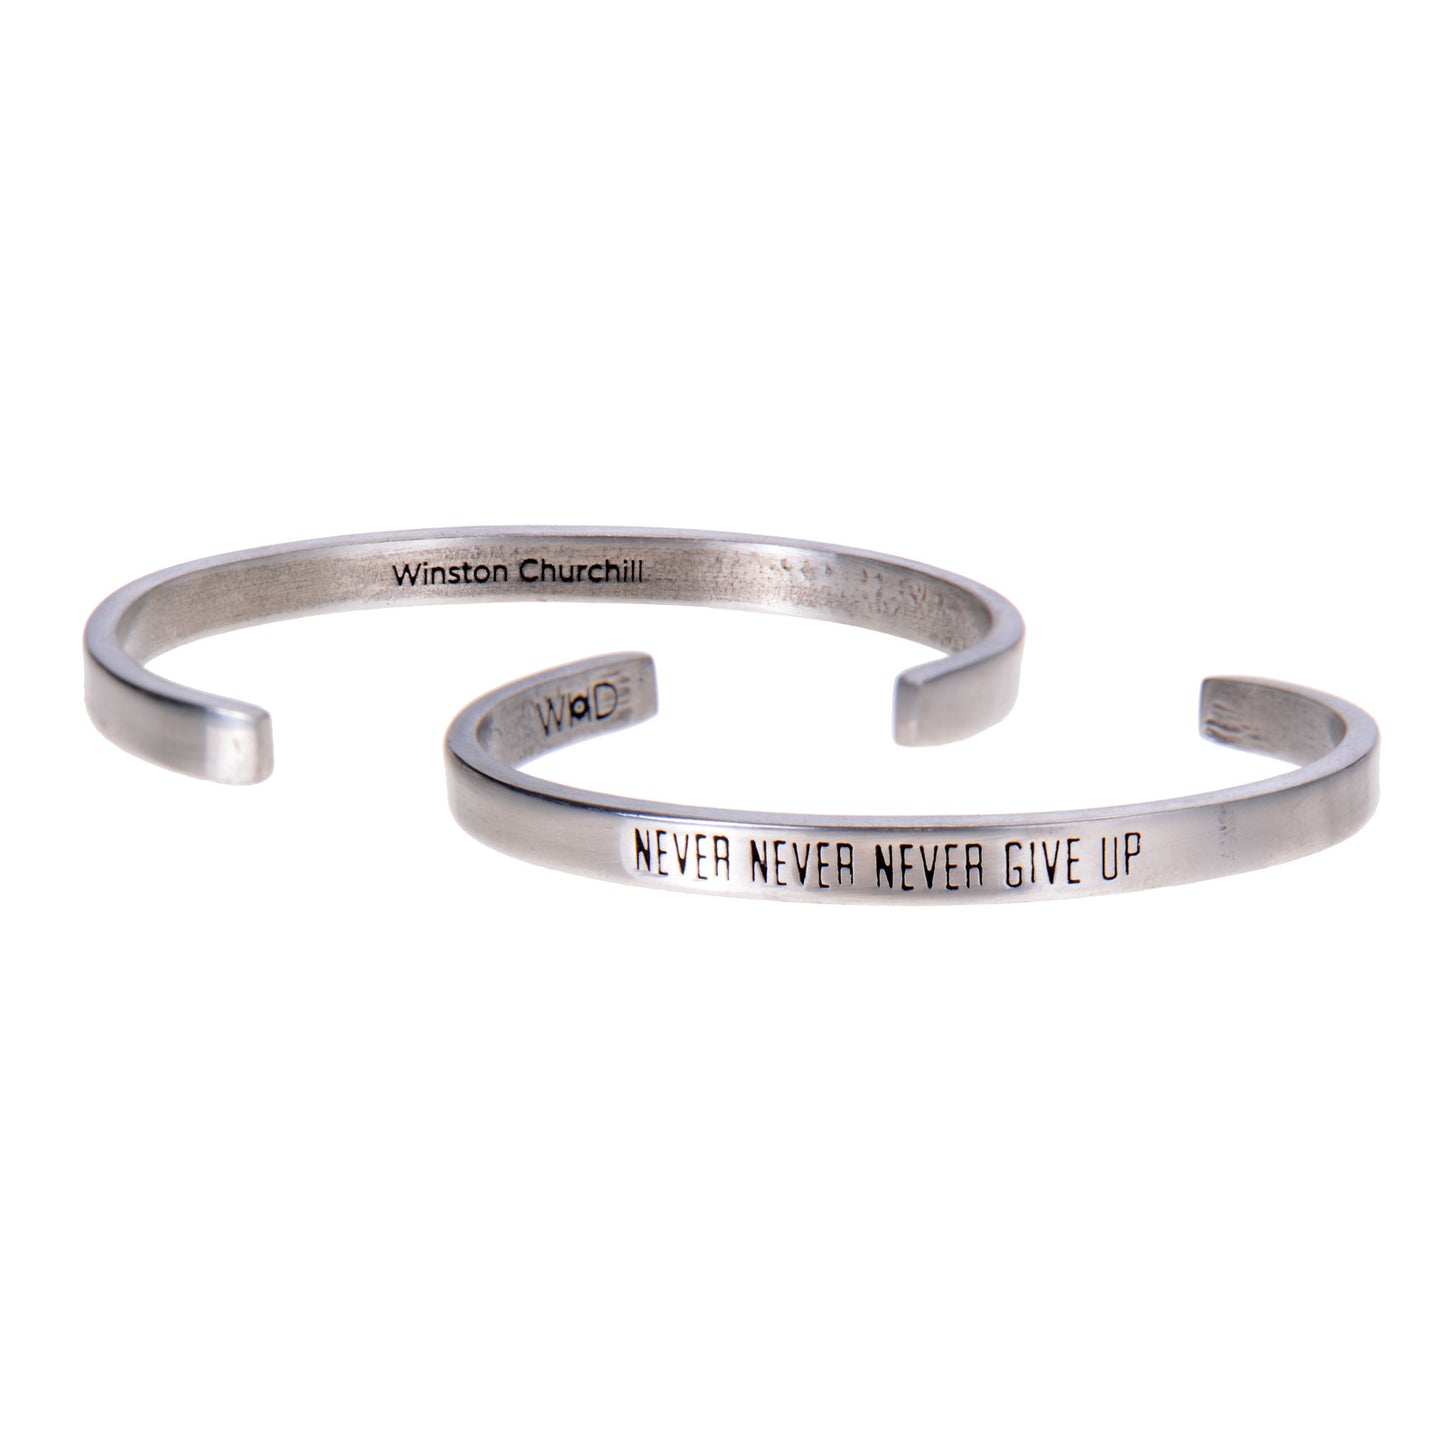 Never Never Never Give Up Winston Churchill Quotable Cuff Bracelet